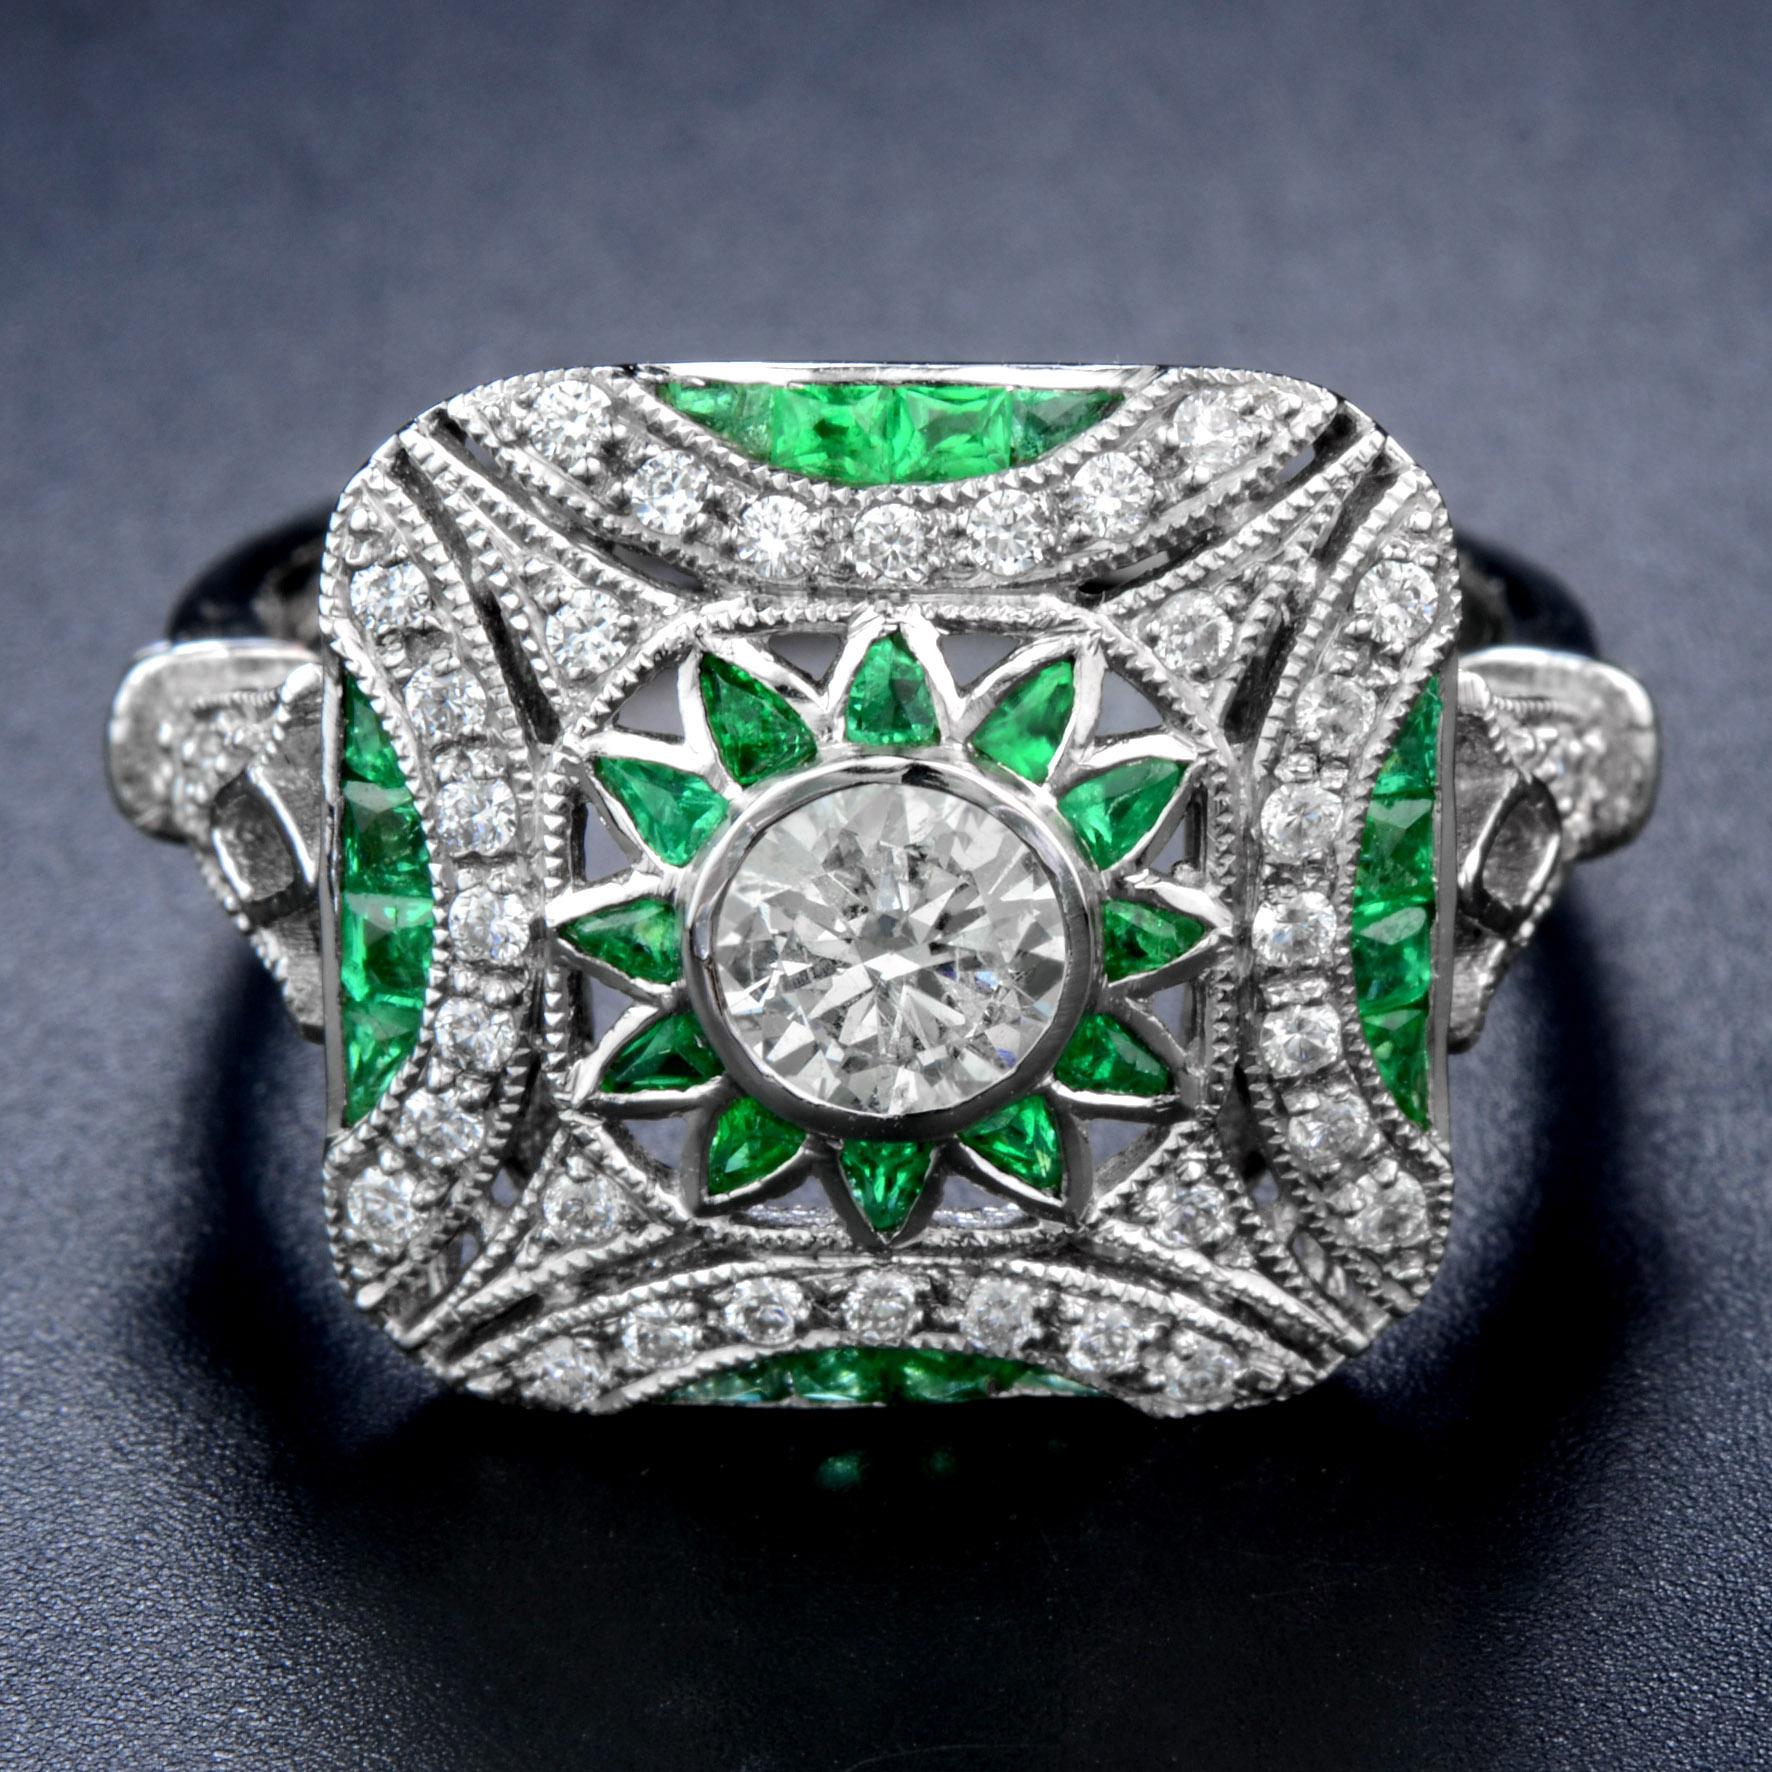 Round Cut Diamond and Emerald Art Deco Style Engagement Ring in Platinum 950 For Sale